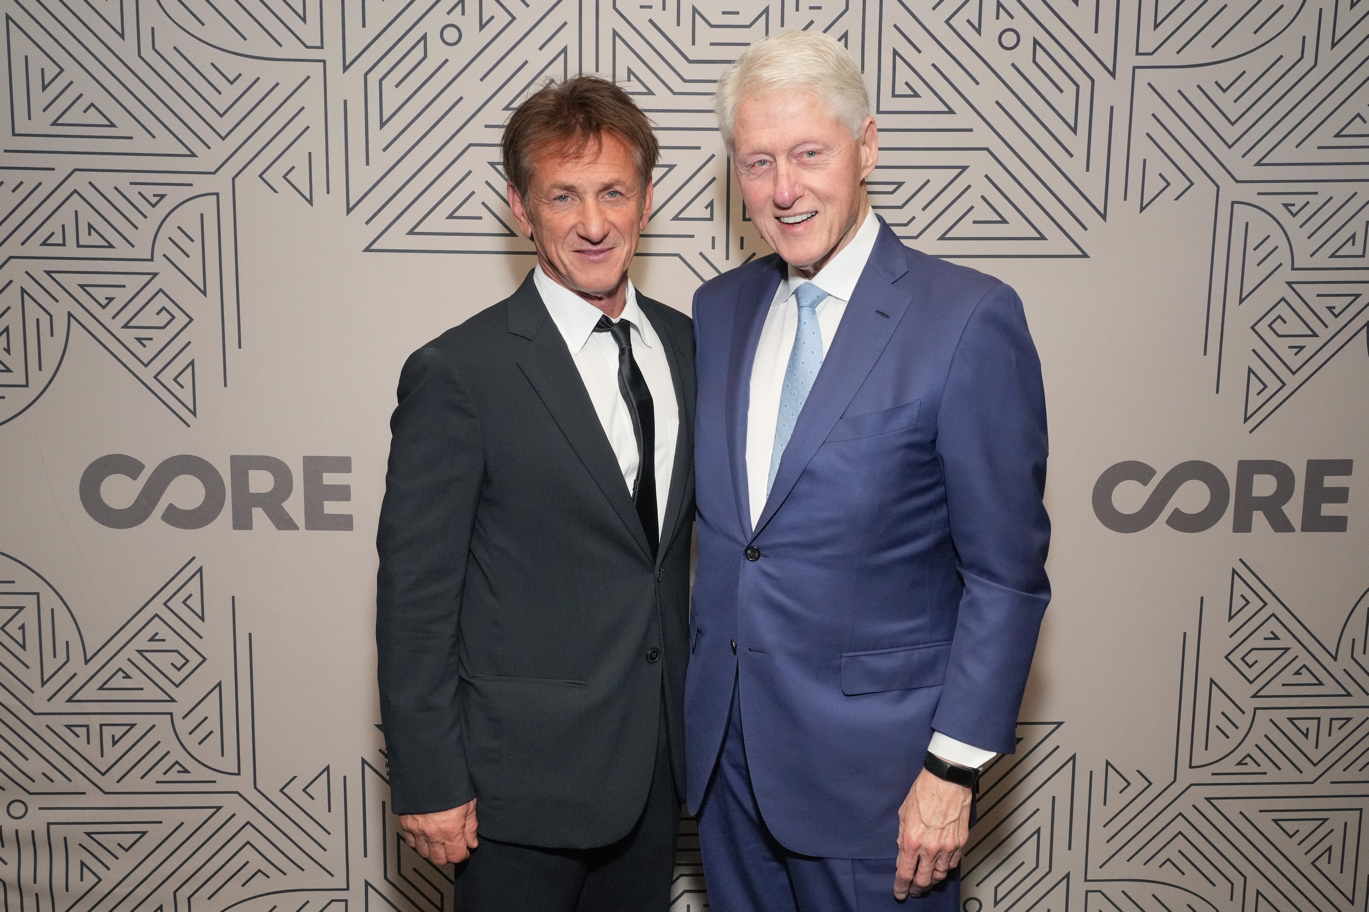 Sean Penn’s CORE Gala Raises $2.5 Million For Charity With A Powerful Message Of Hope From Ukrainian President Zelenskyy